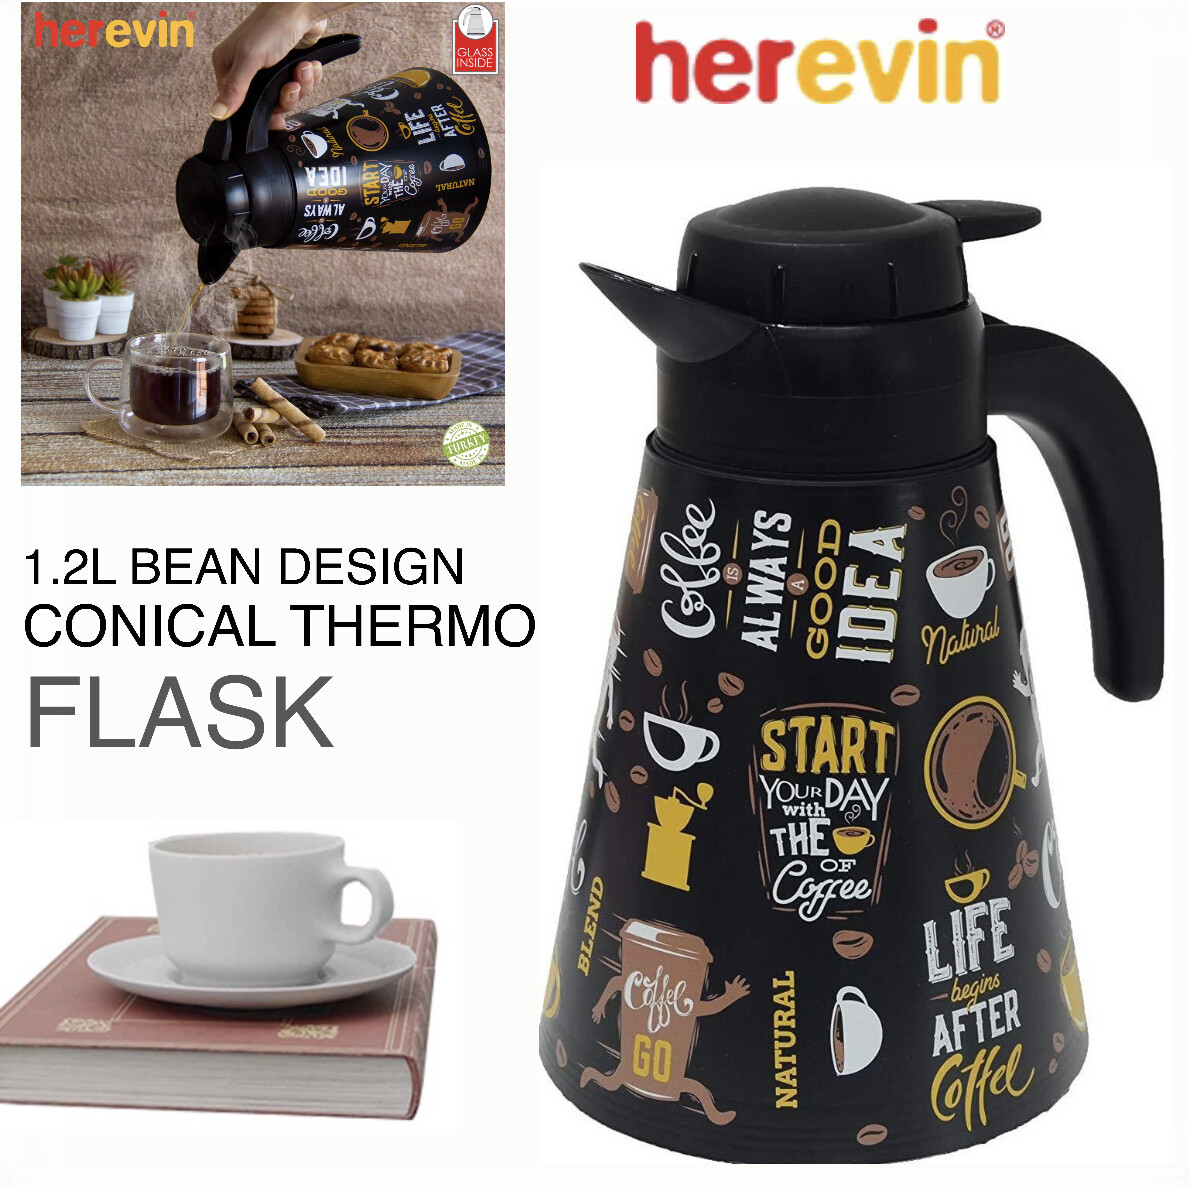 HEREVIN Flask 1.2L